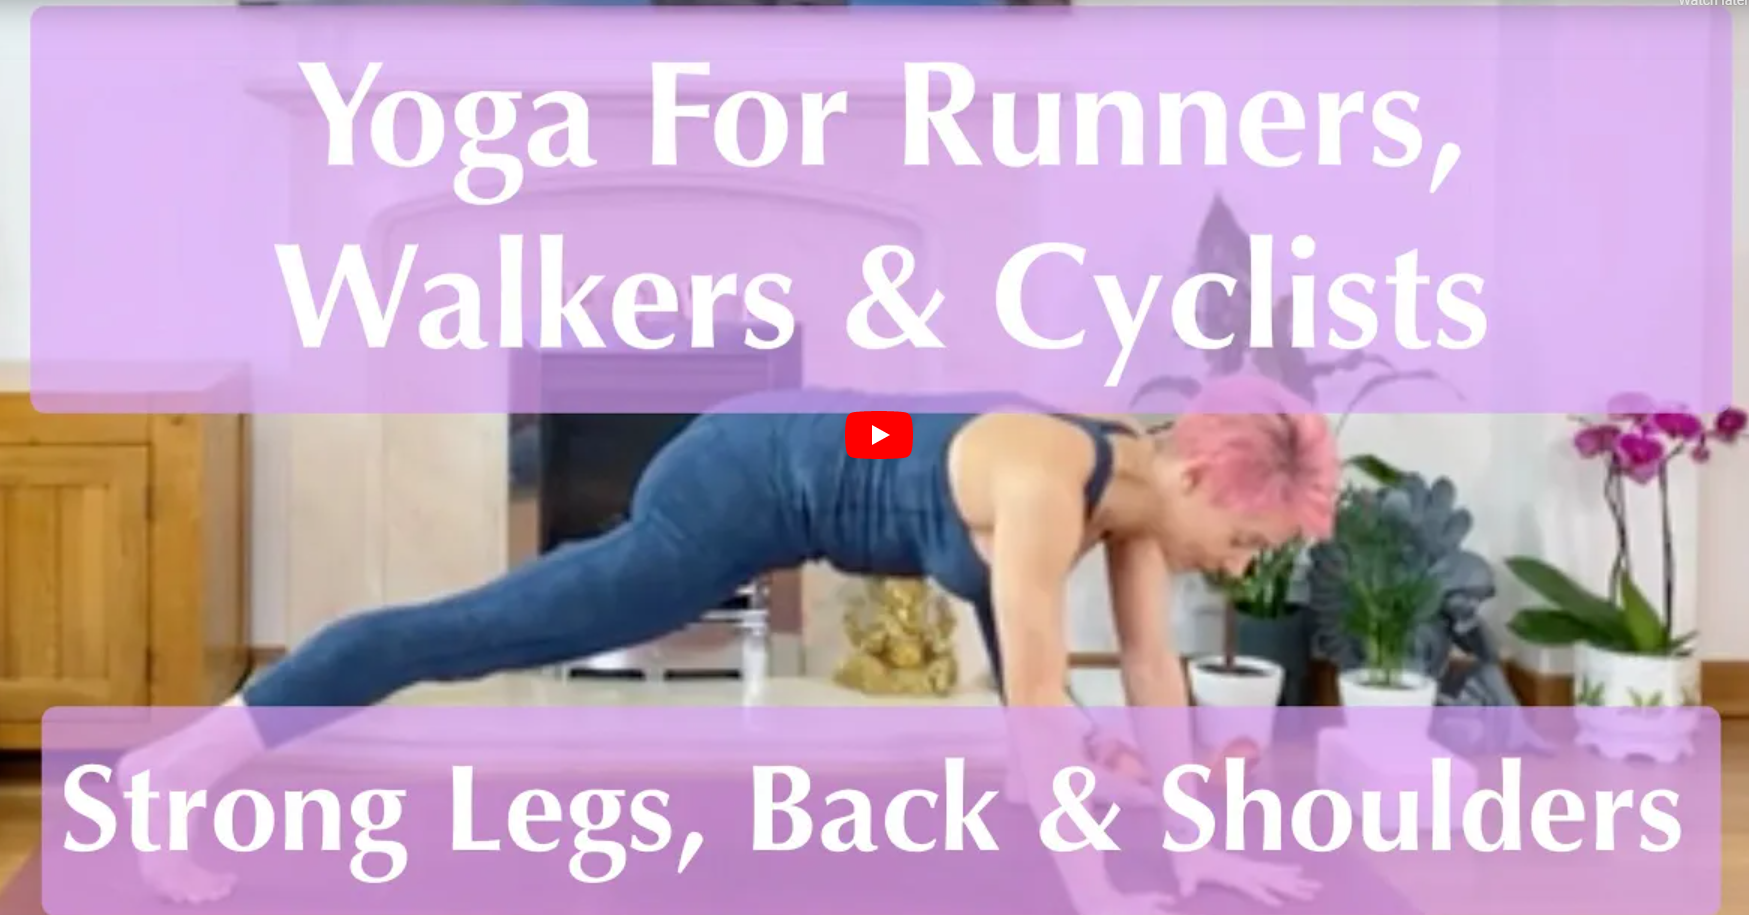 Olga Oakenfold - Yoga For Runners, Walkers & Cyclists. Strong Stretch, Legs, Back & Shoulders.png